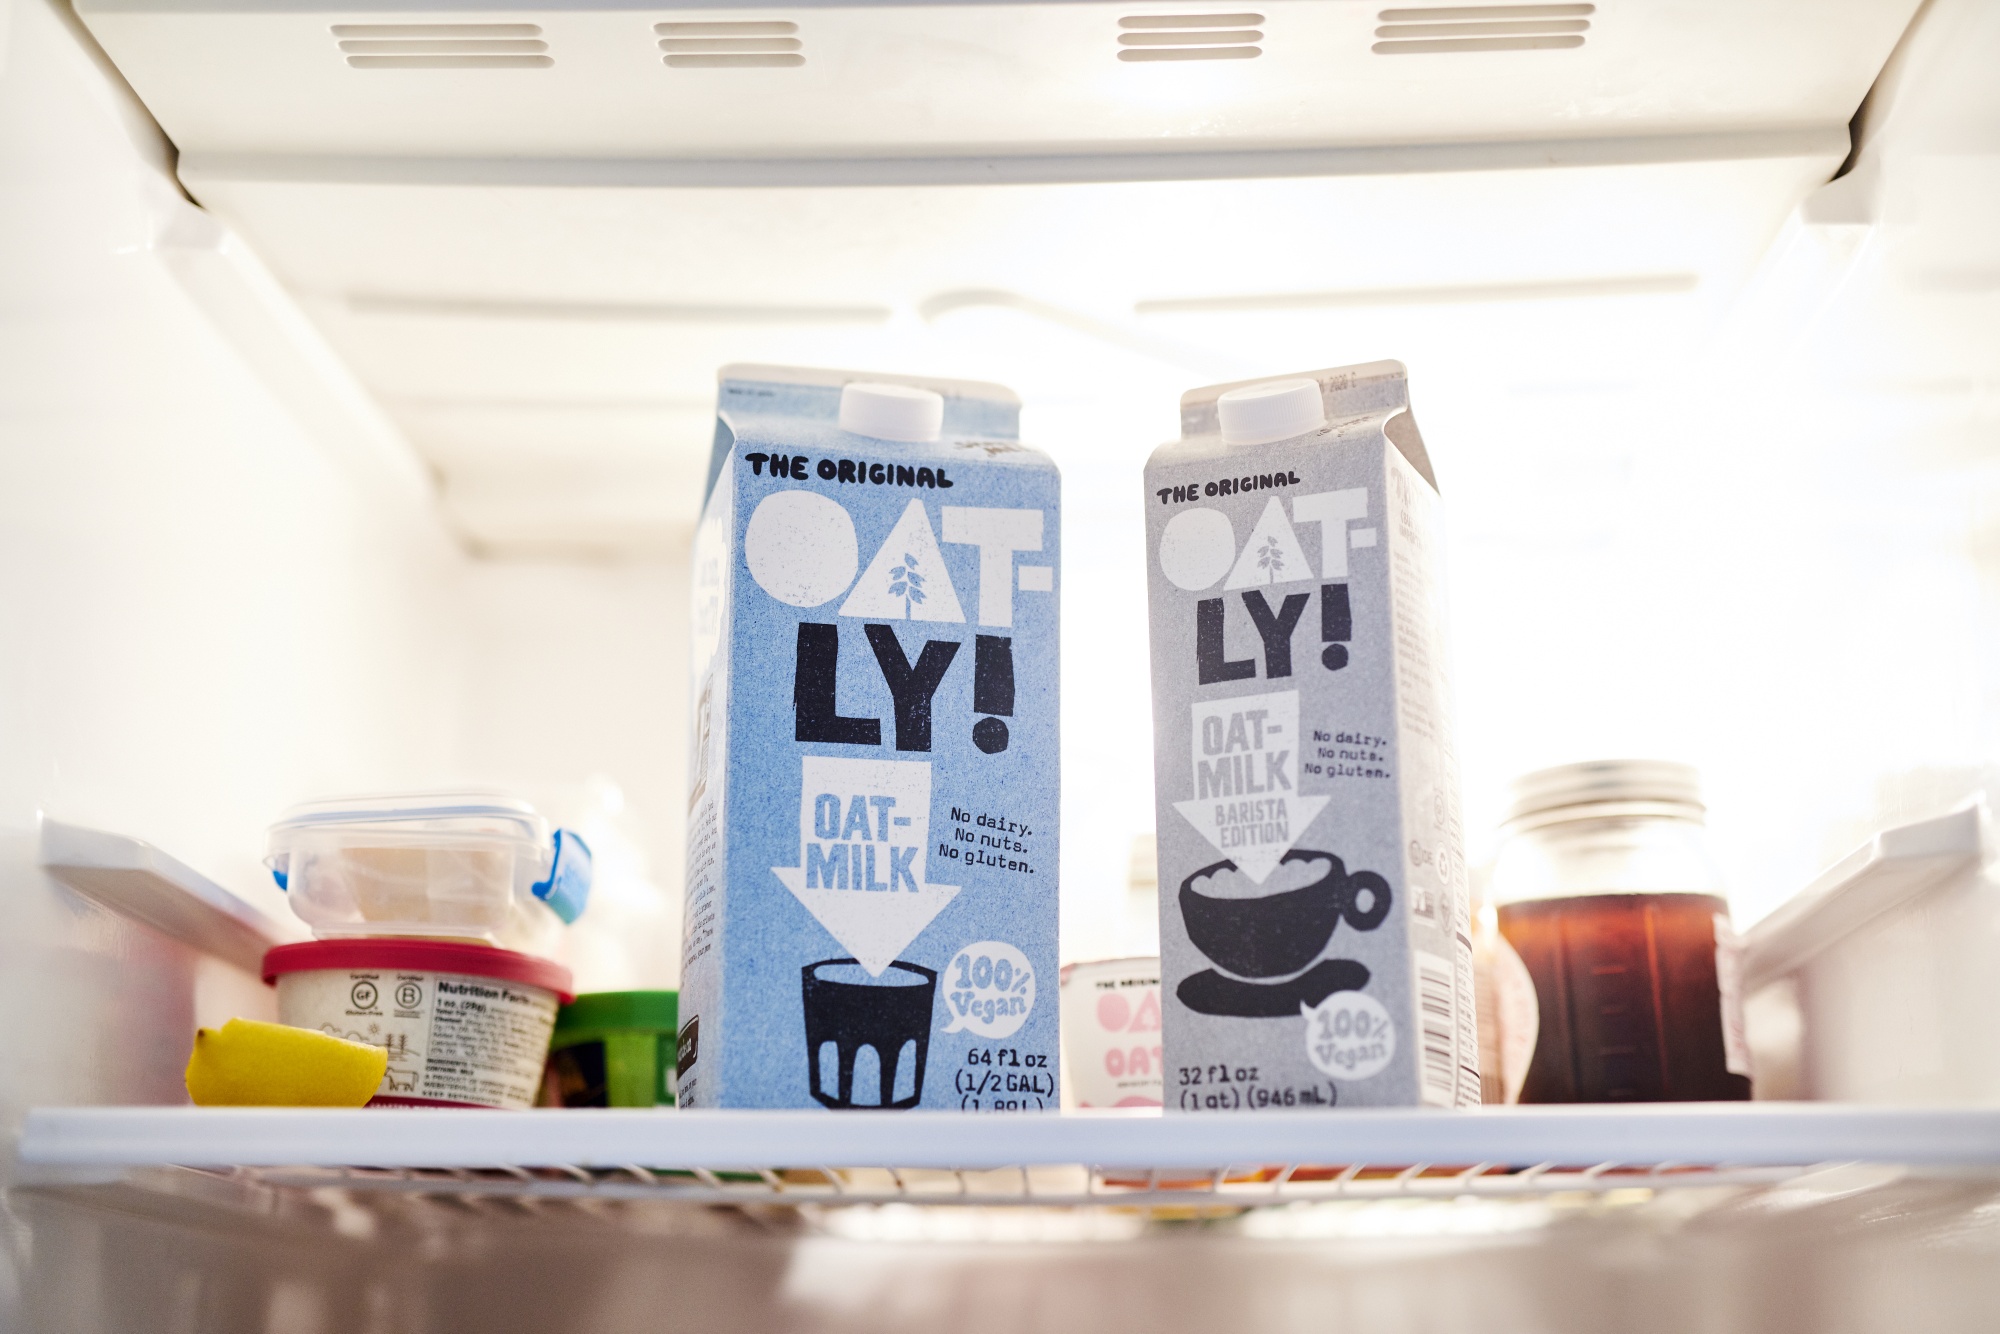 Milk carton shortage expected to ease in early 2024